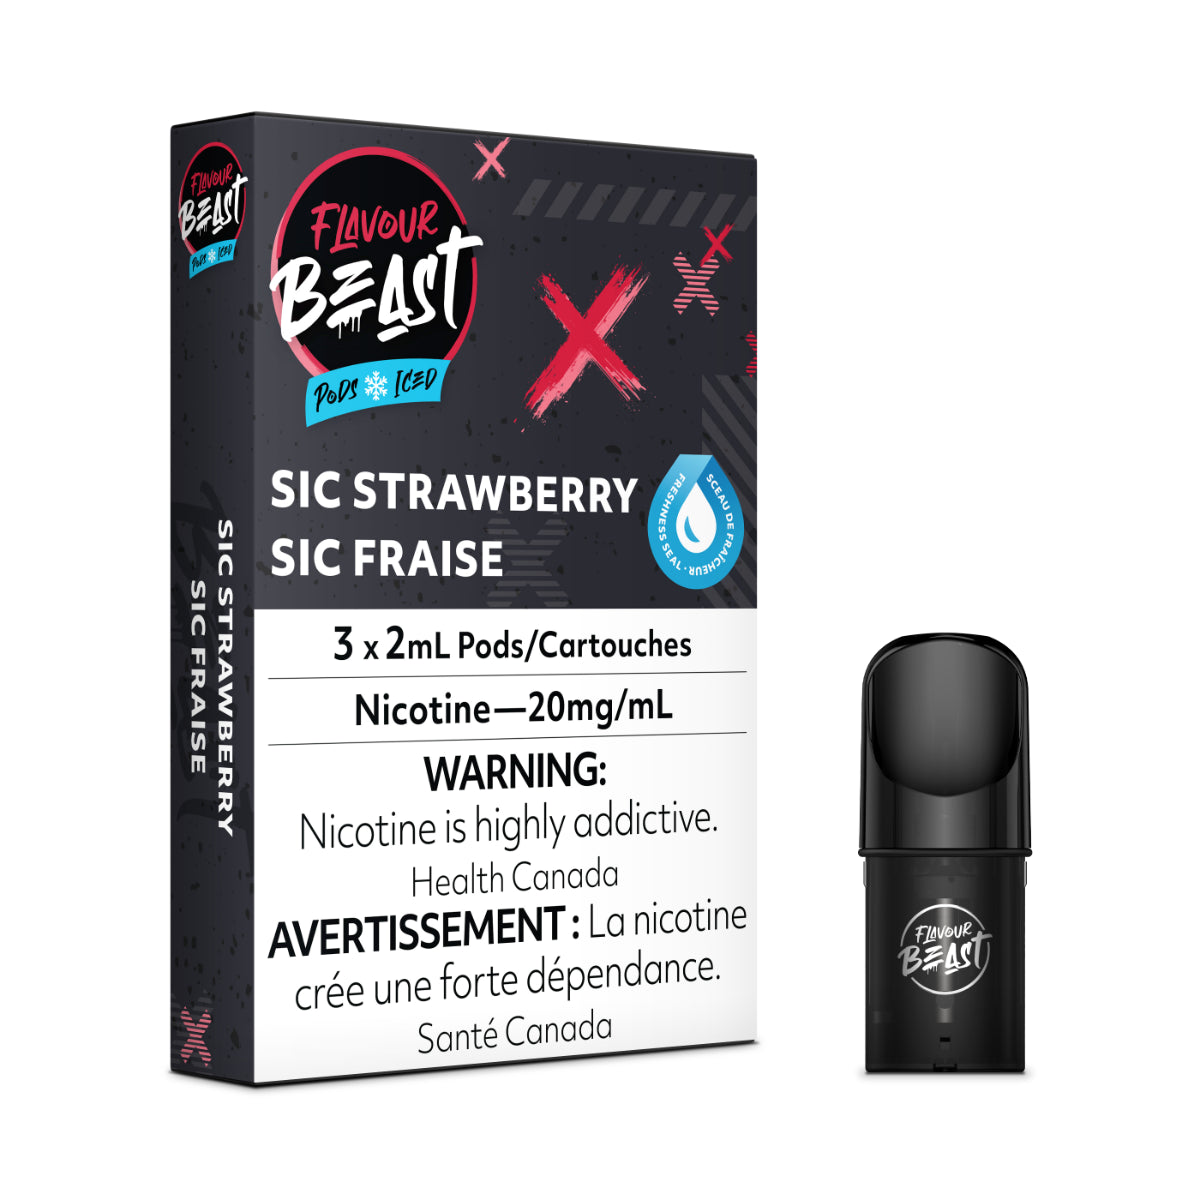 FLAVOUR BEAST SIC STRAWBERRY ICED PODS